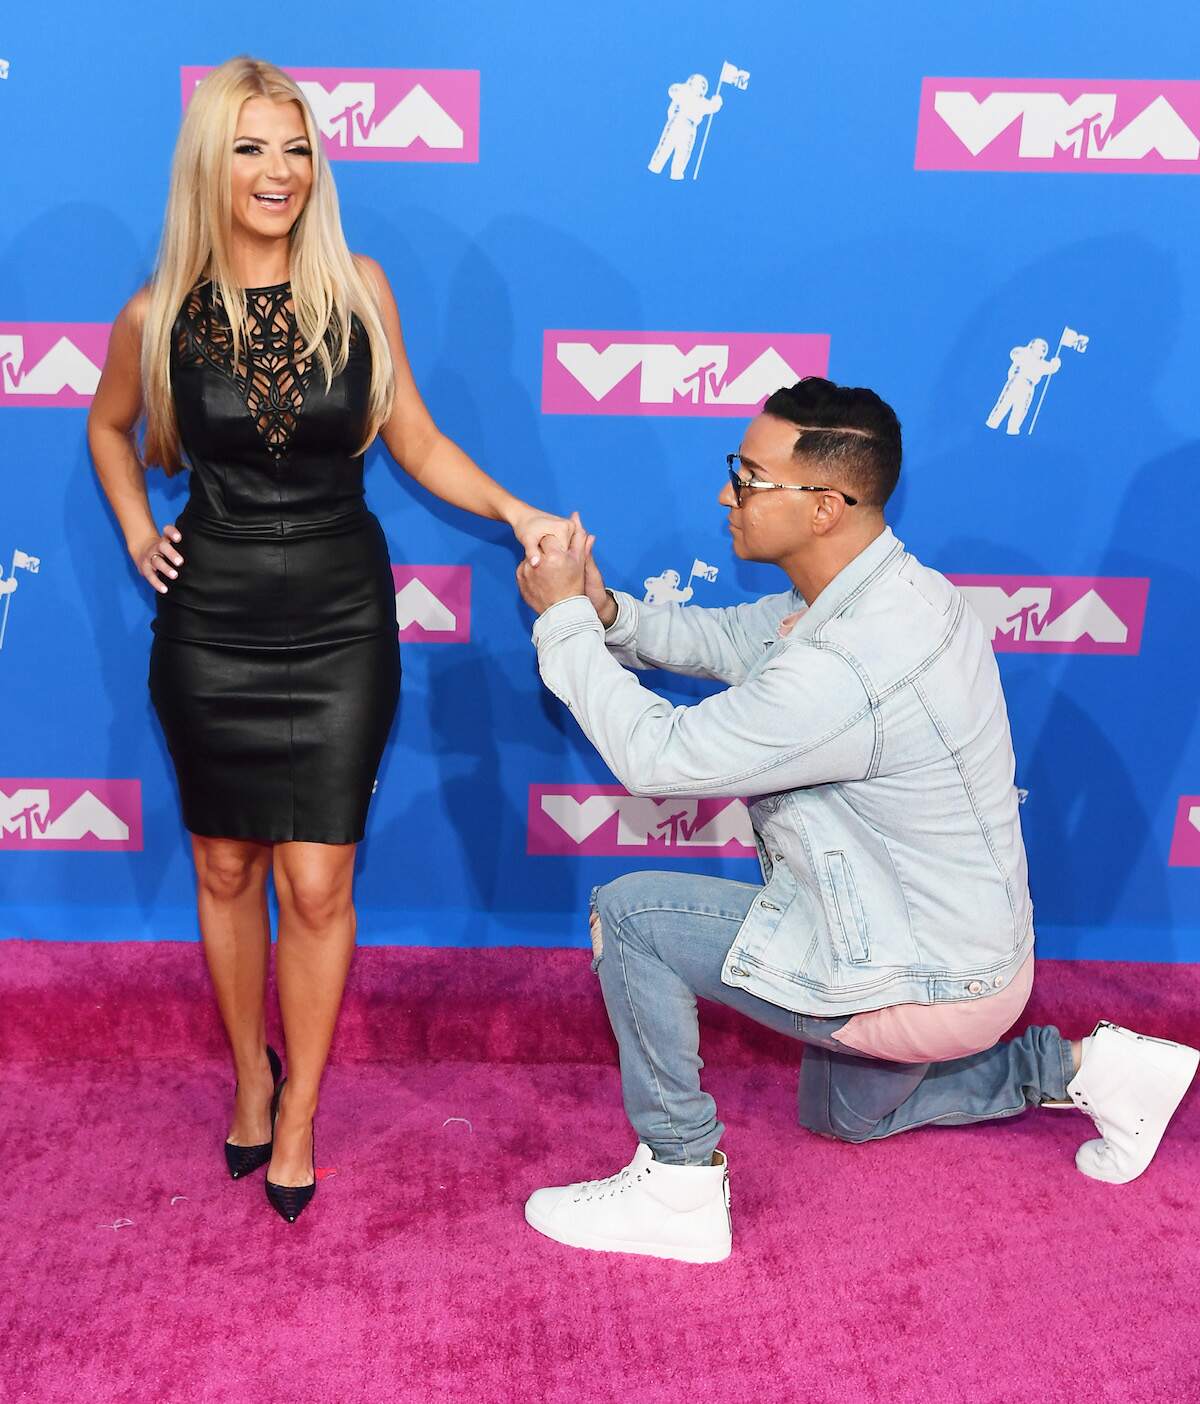 Lauren and Mike Sorrentino at the MTV Video Music Awards